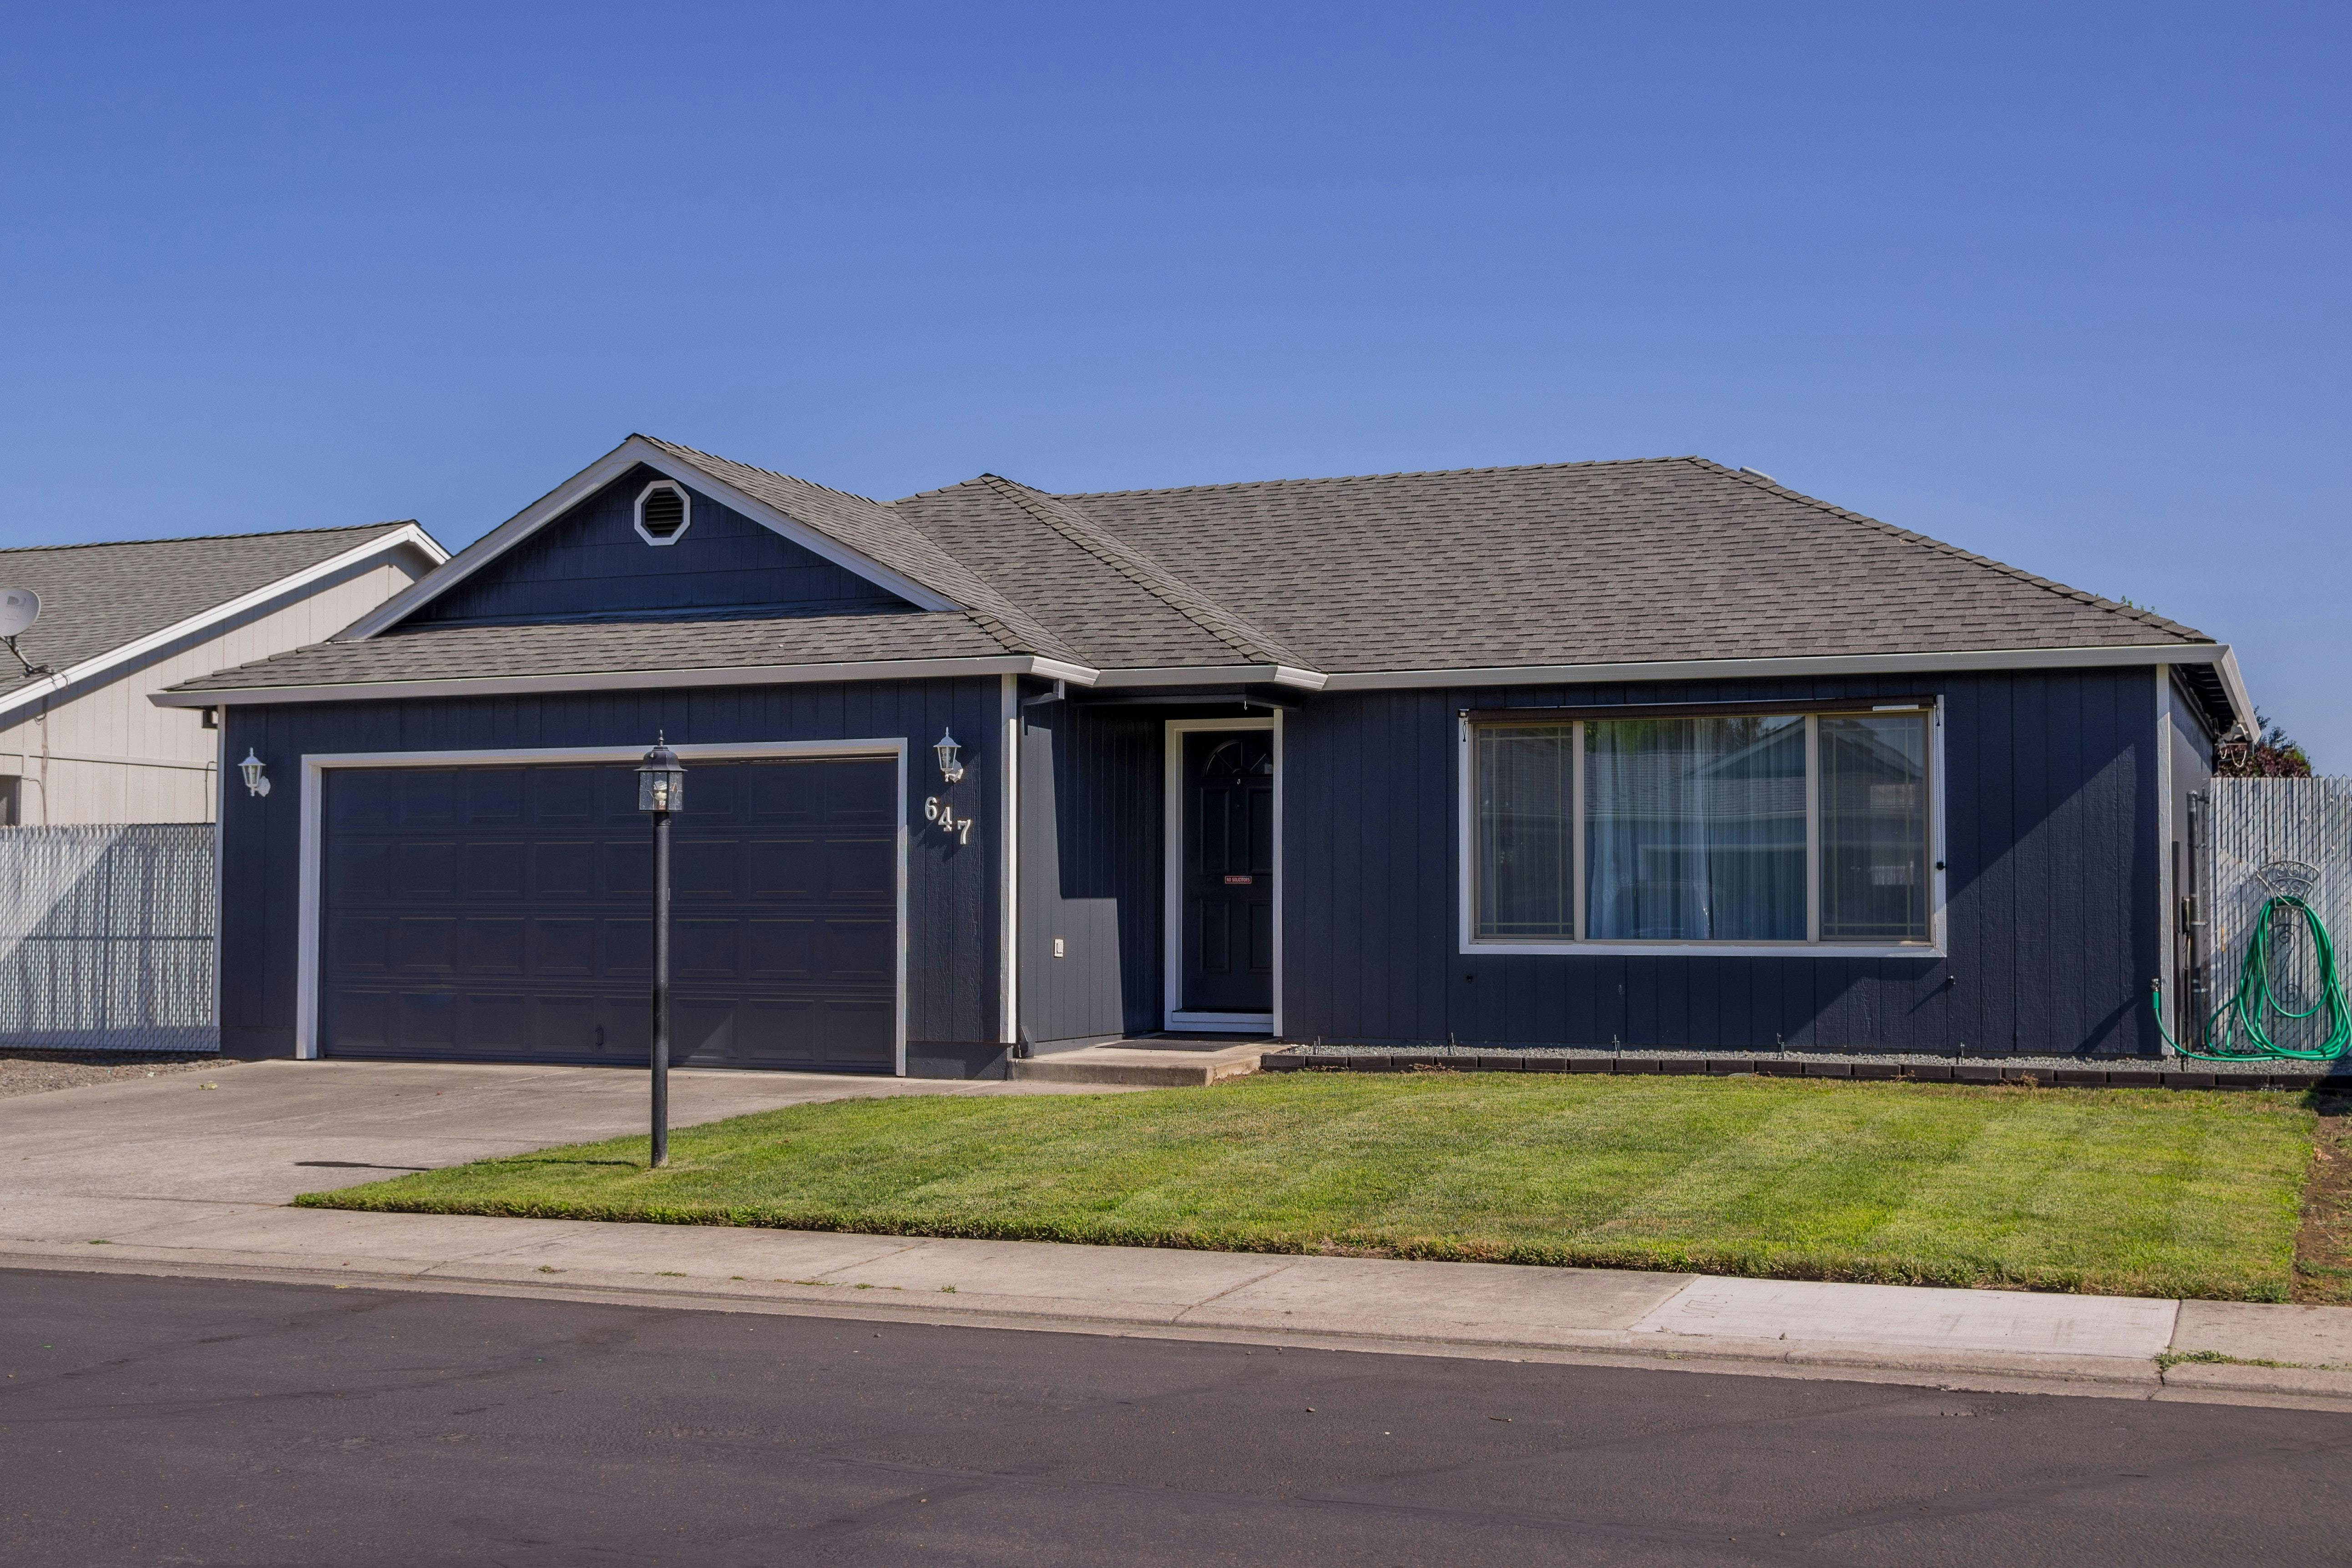 An image of a dark grey single-family home with neat lawn against a blue sky, an ideal first-time rental home. 